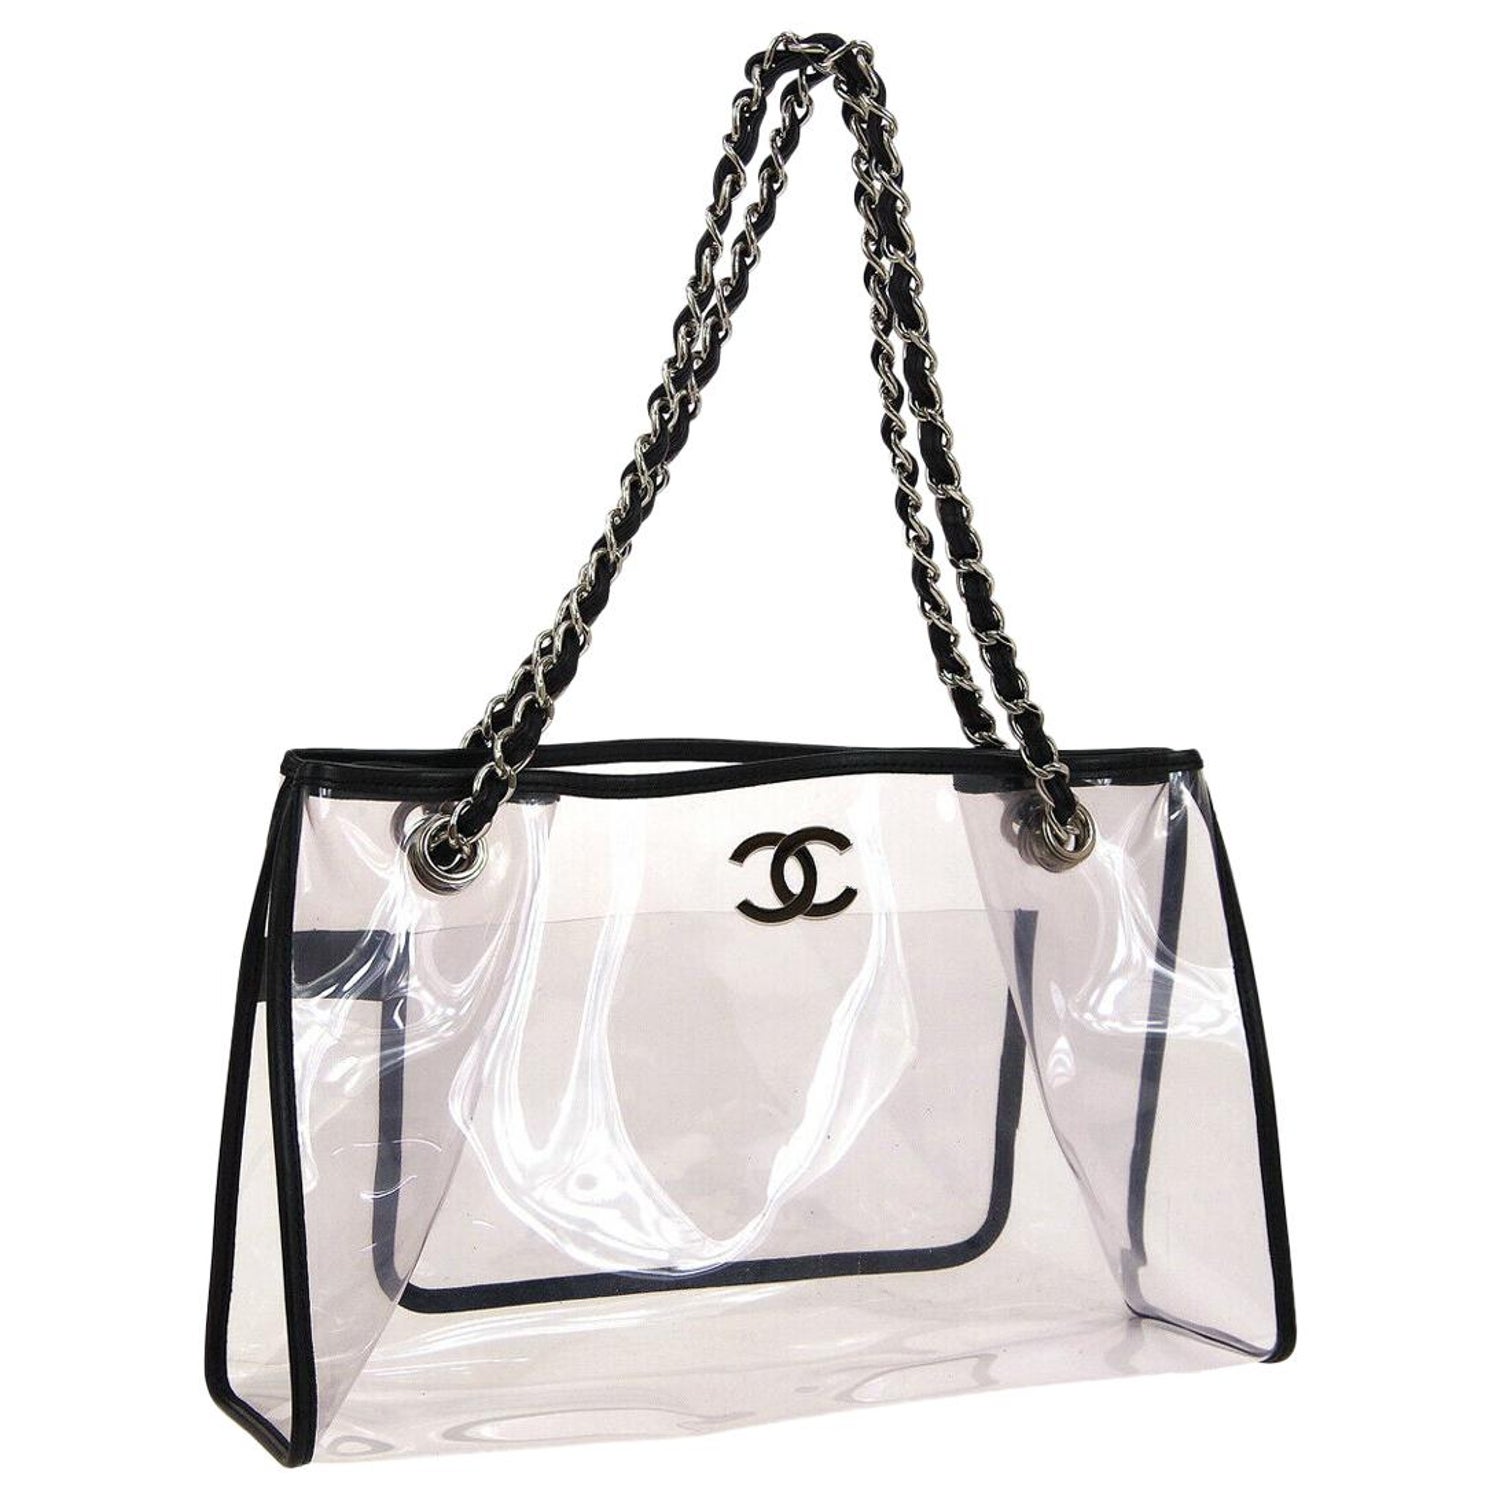 Introducir 63+ imagen chanel clear tote